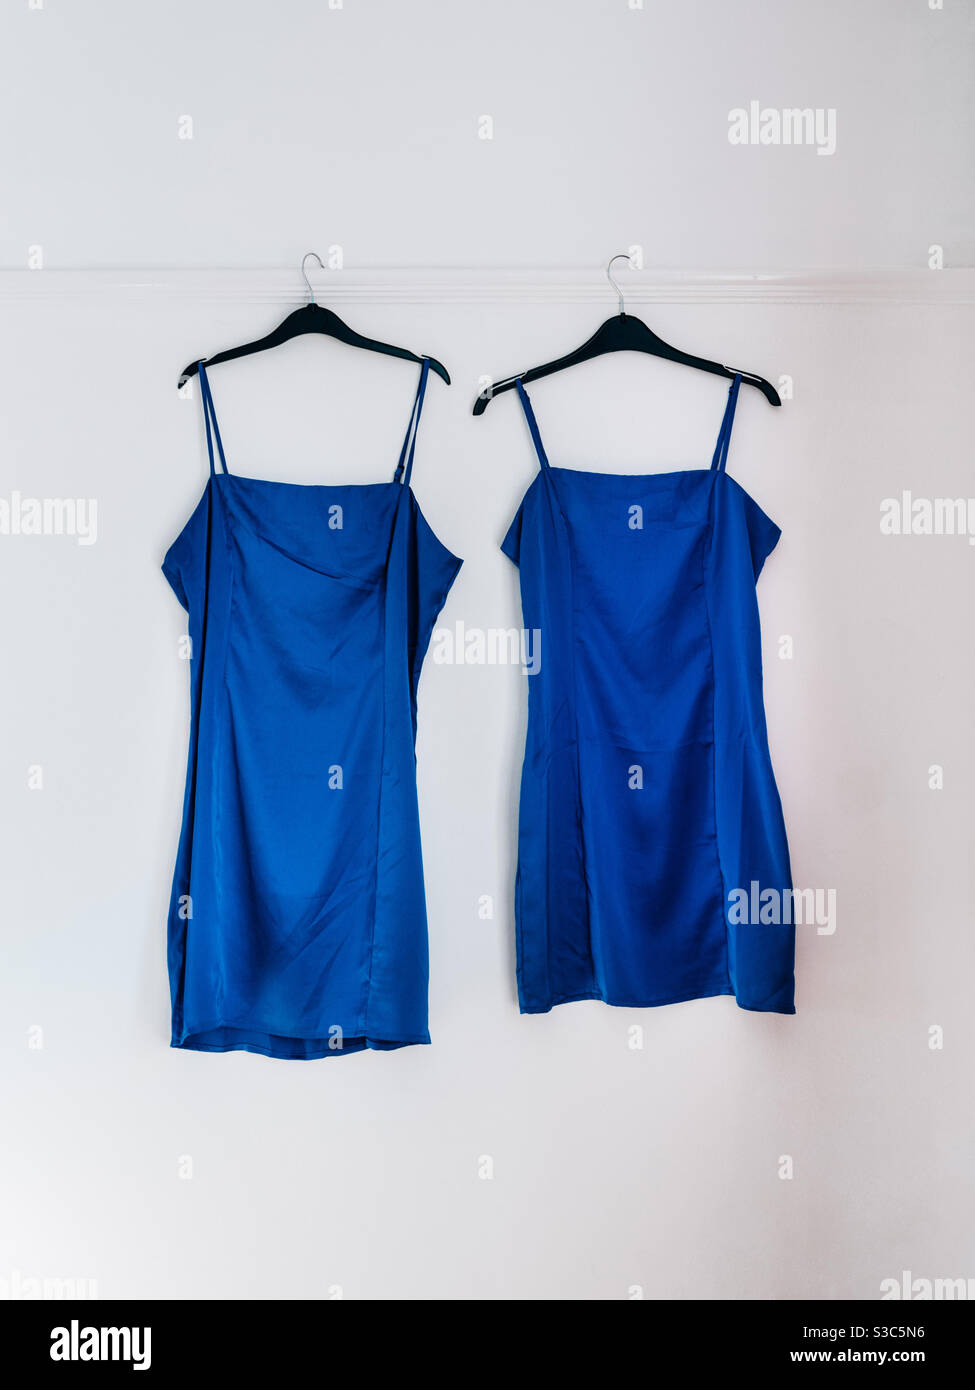 Matching blue satin dresses on hangers against a white wall Stock Photo